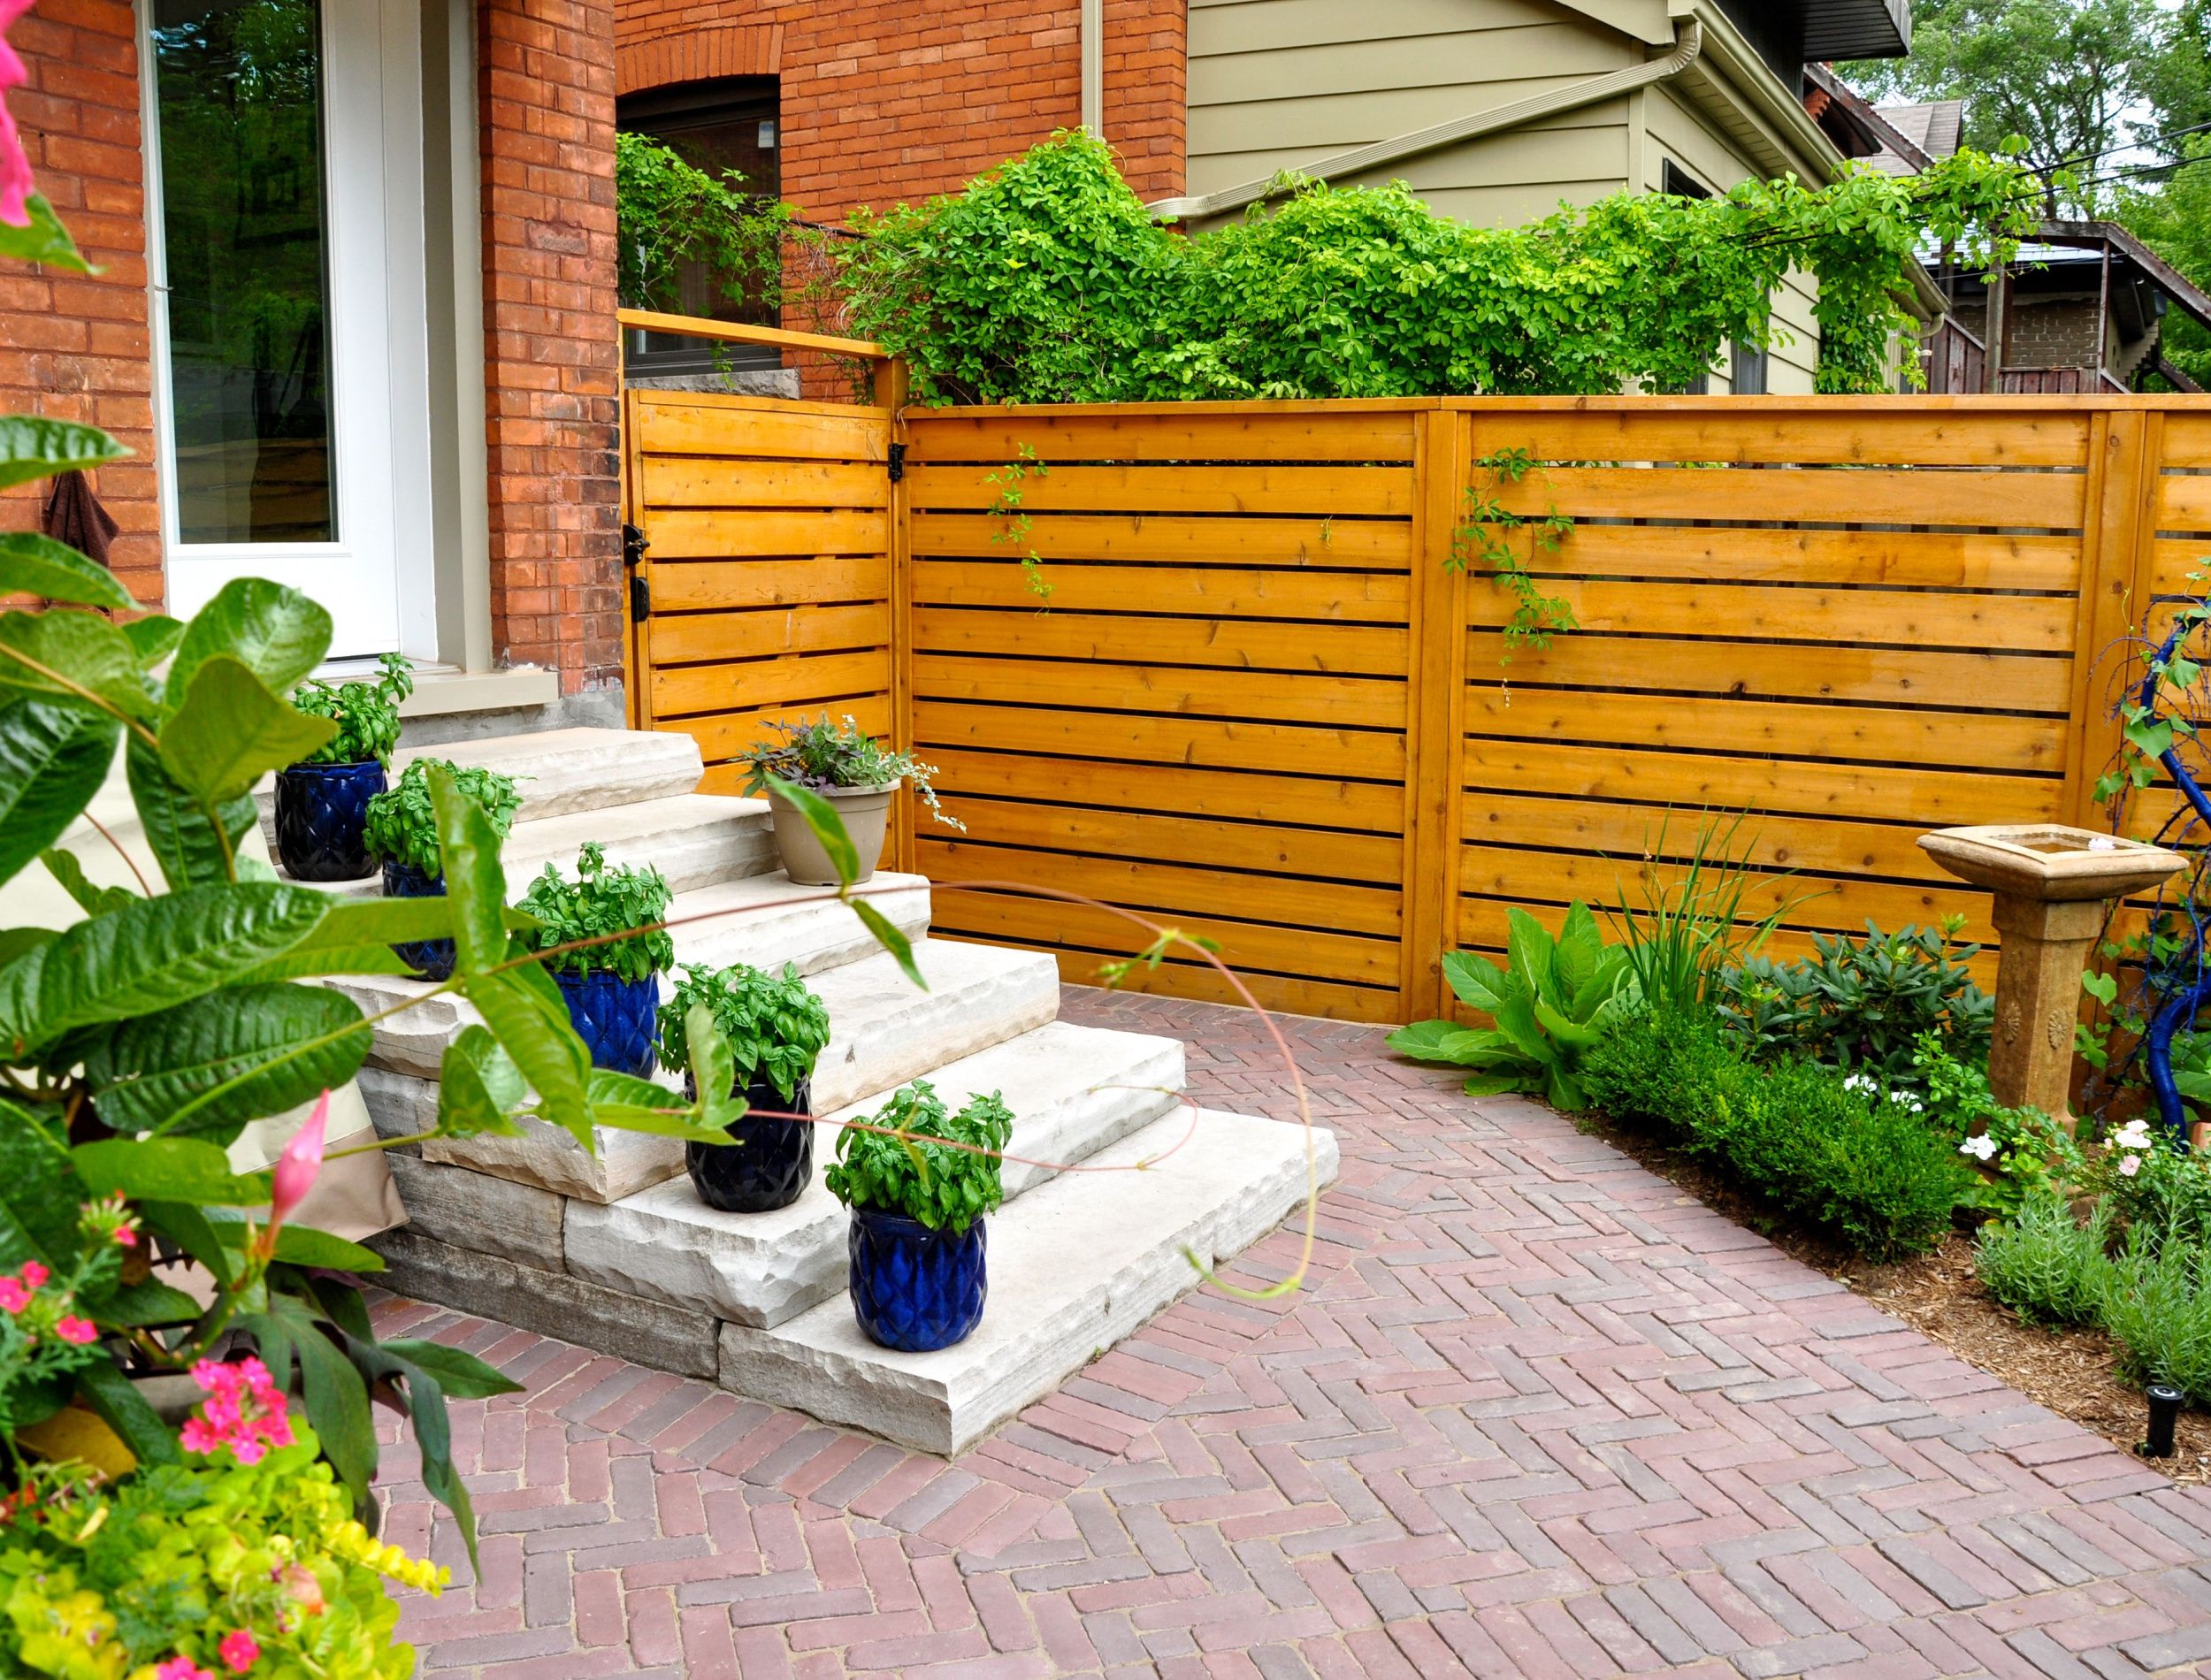 5 Horizontal Fence Ideas That Will Make You Want to Update Your Space